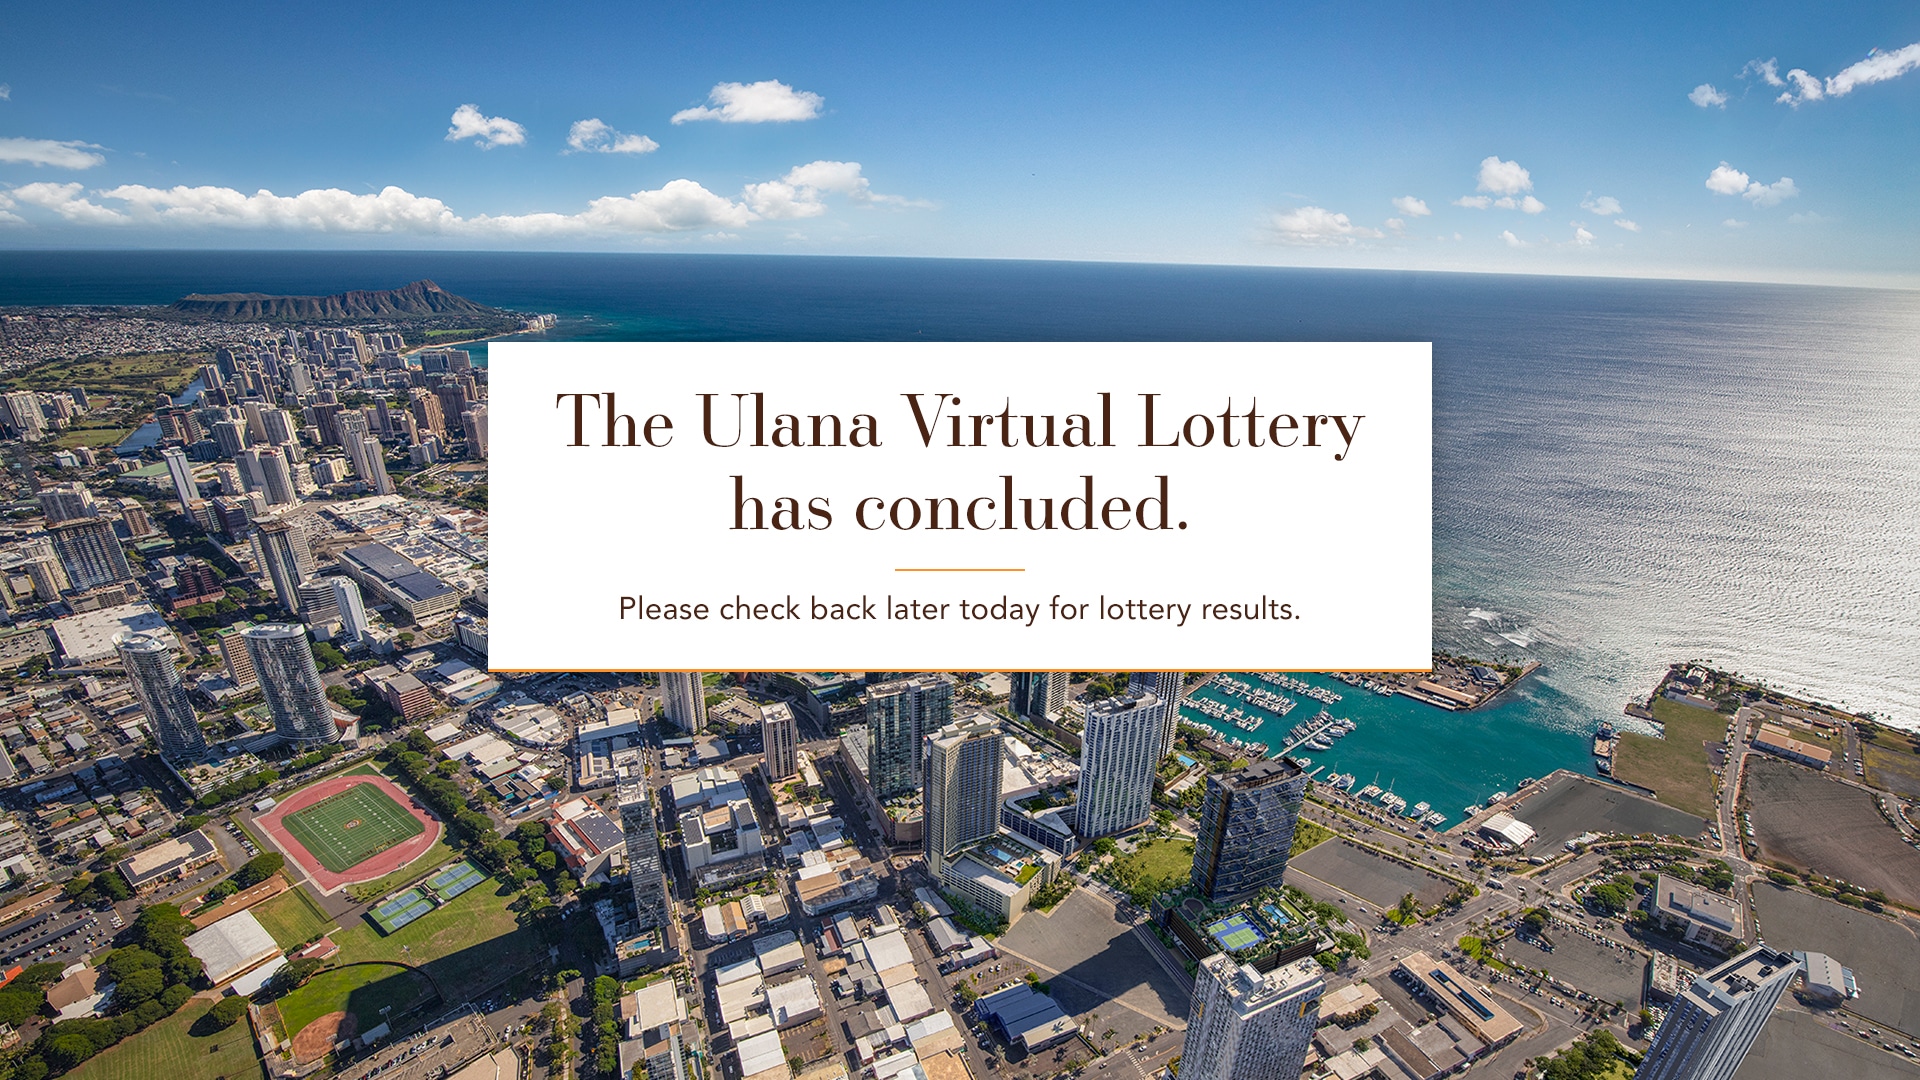 The Ulana Virtual Lottery has concluded